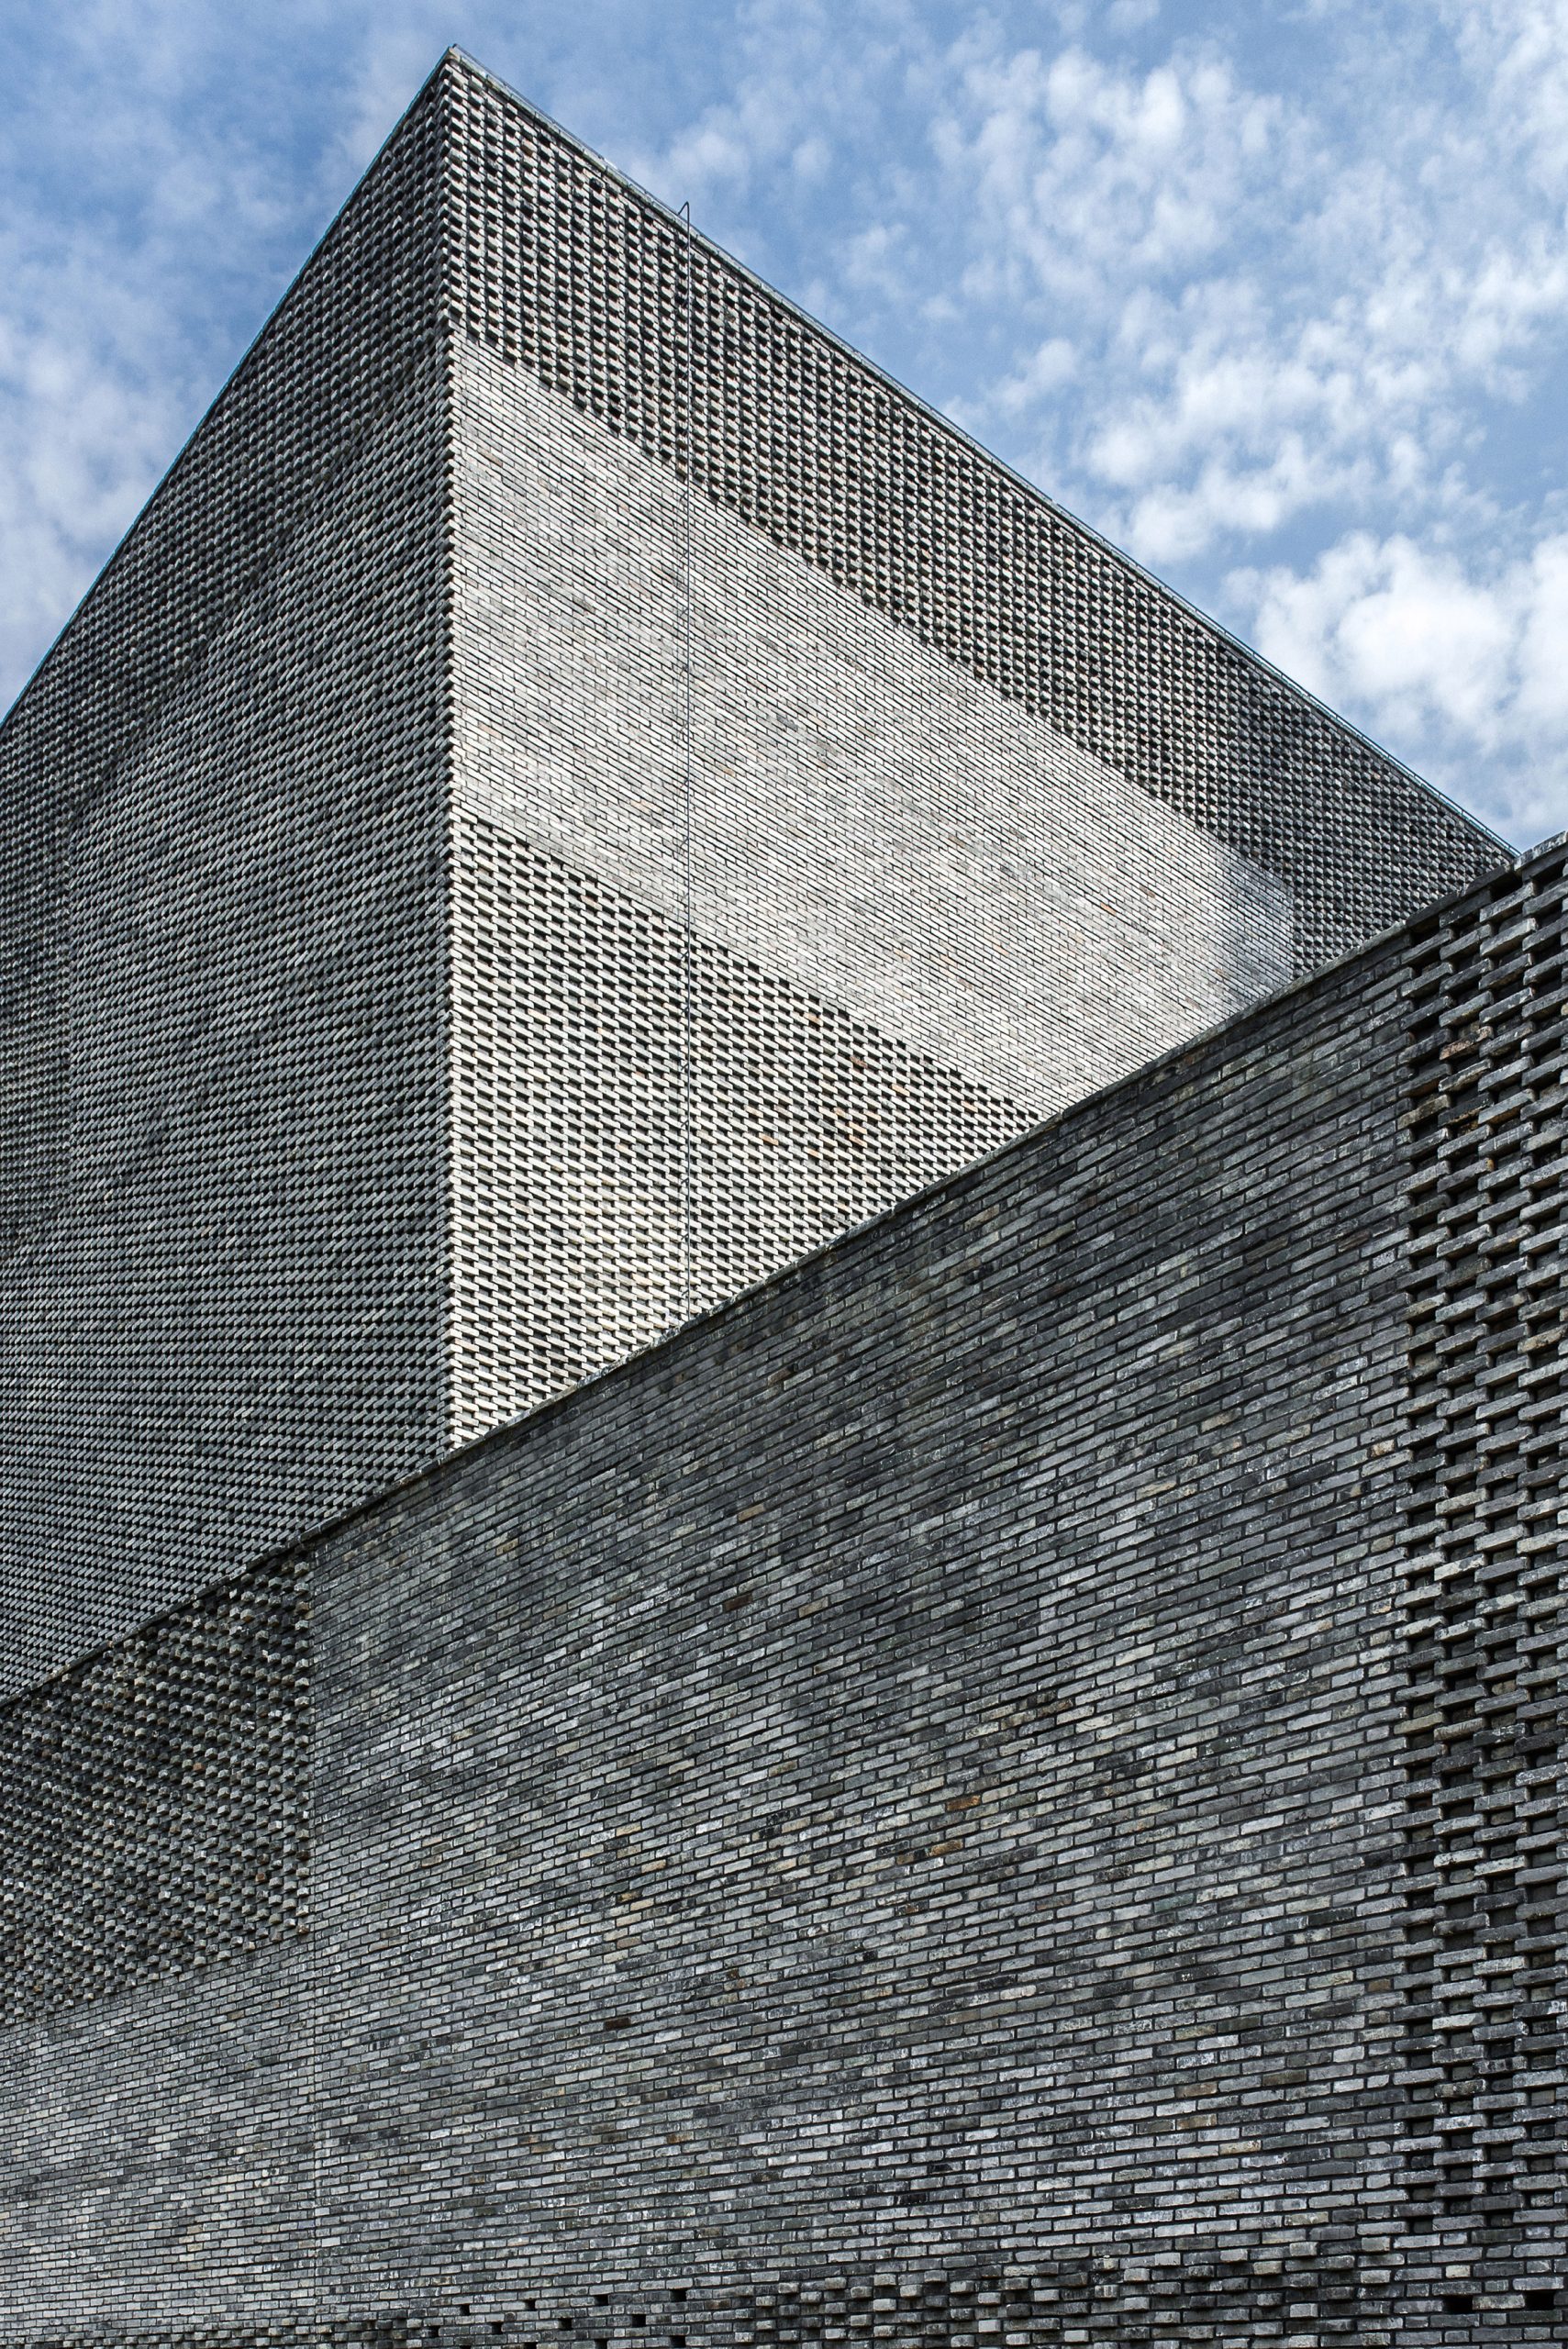 A tactile facade made from recycled grey bricks